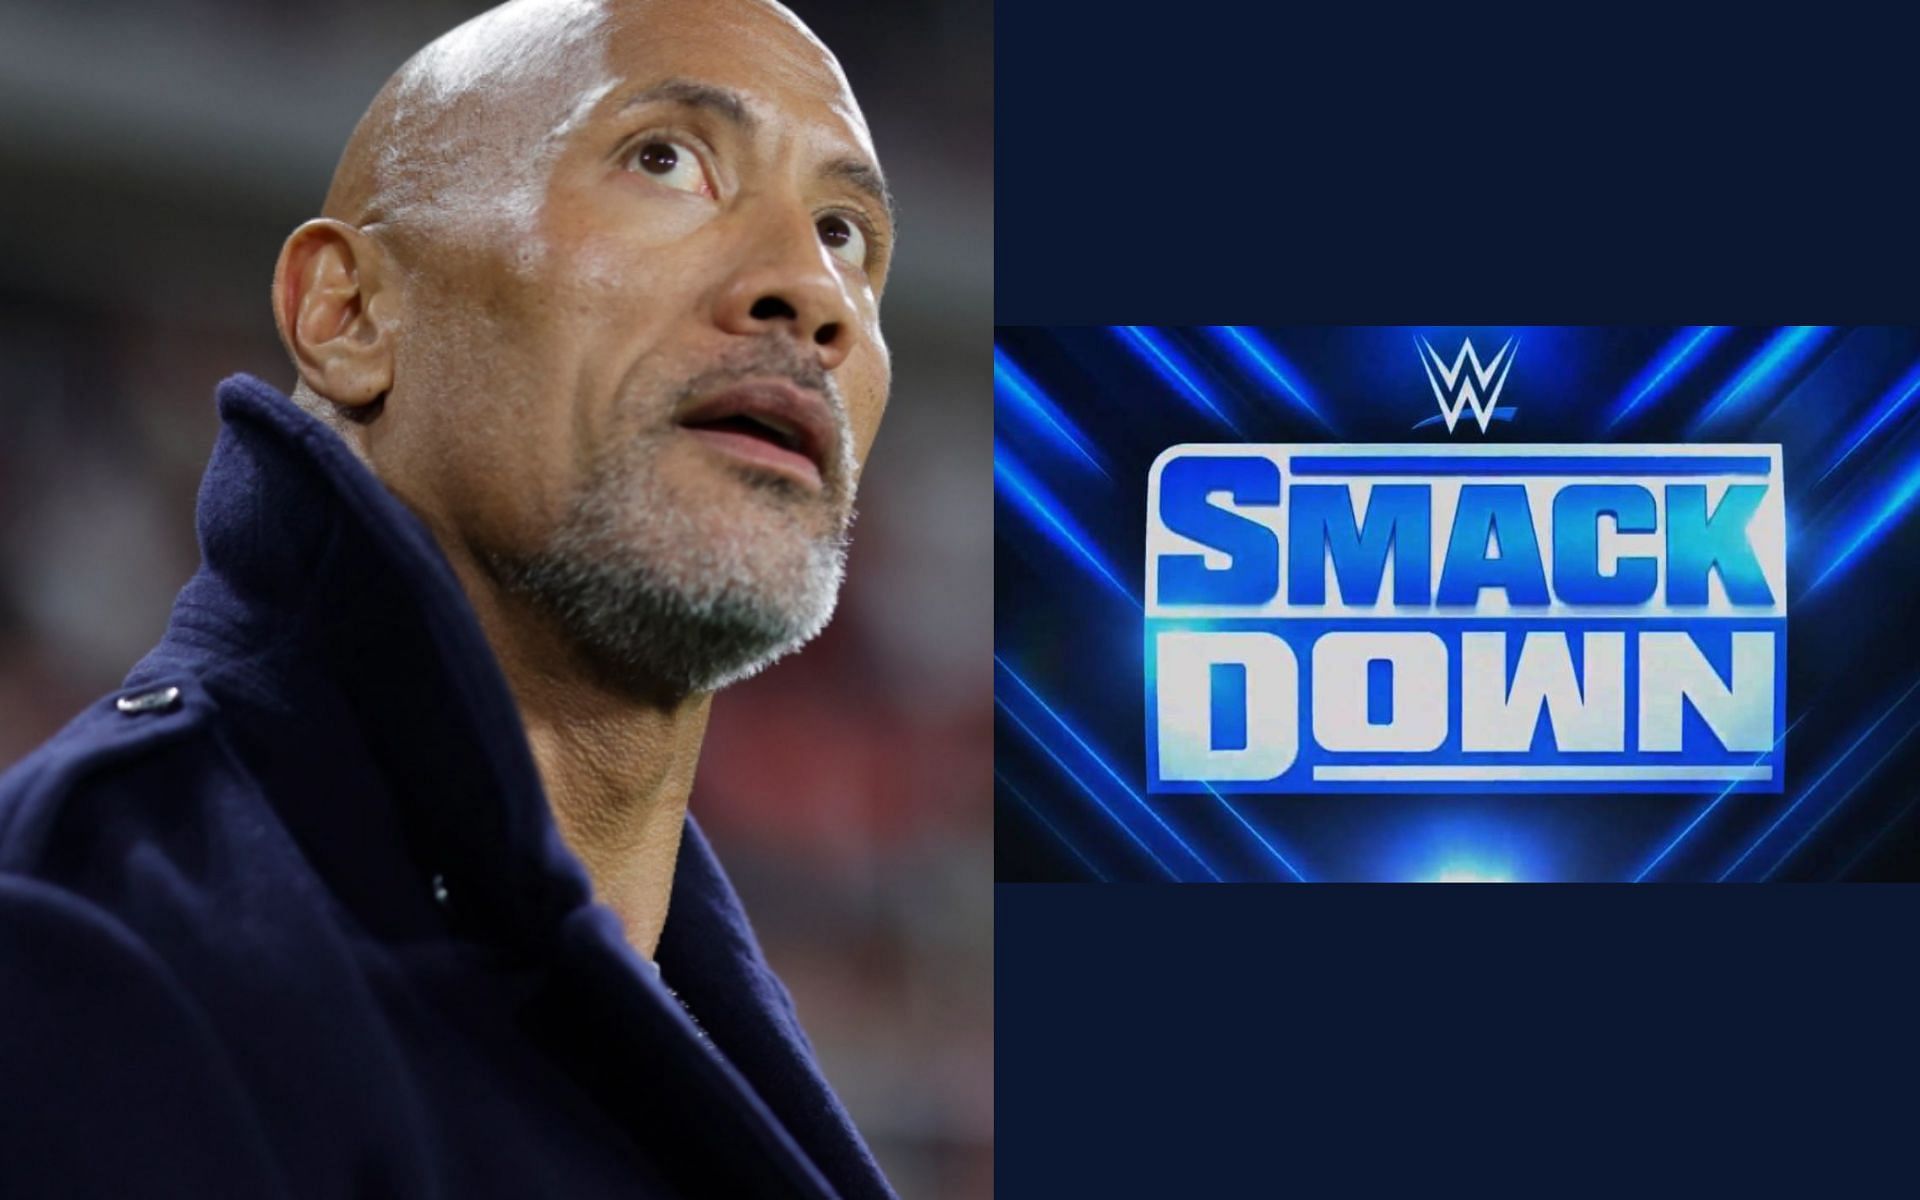 WWE star takes a shot at The Rock during SmackDown? Blockbuster match could be in the works!